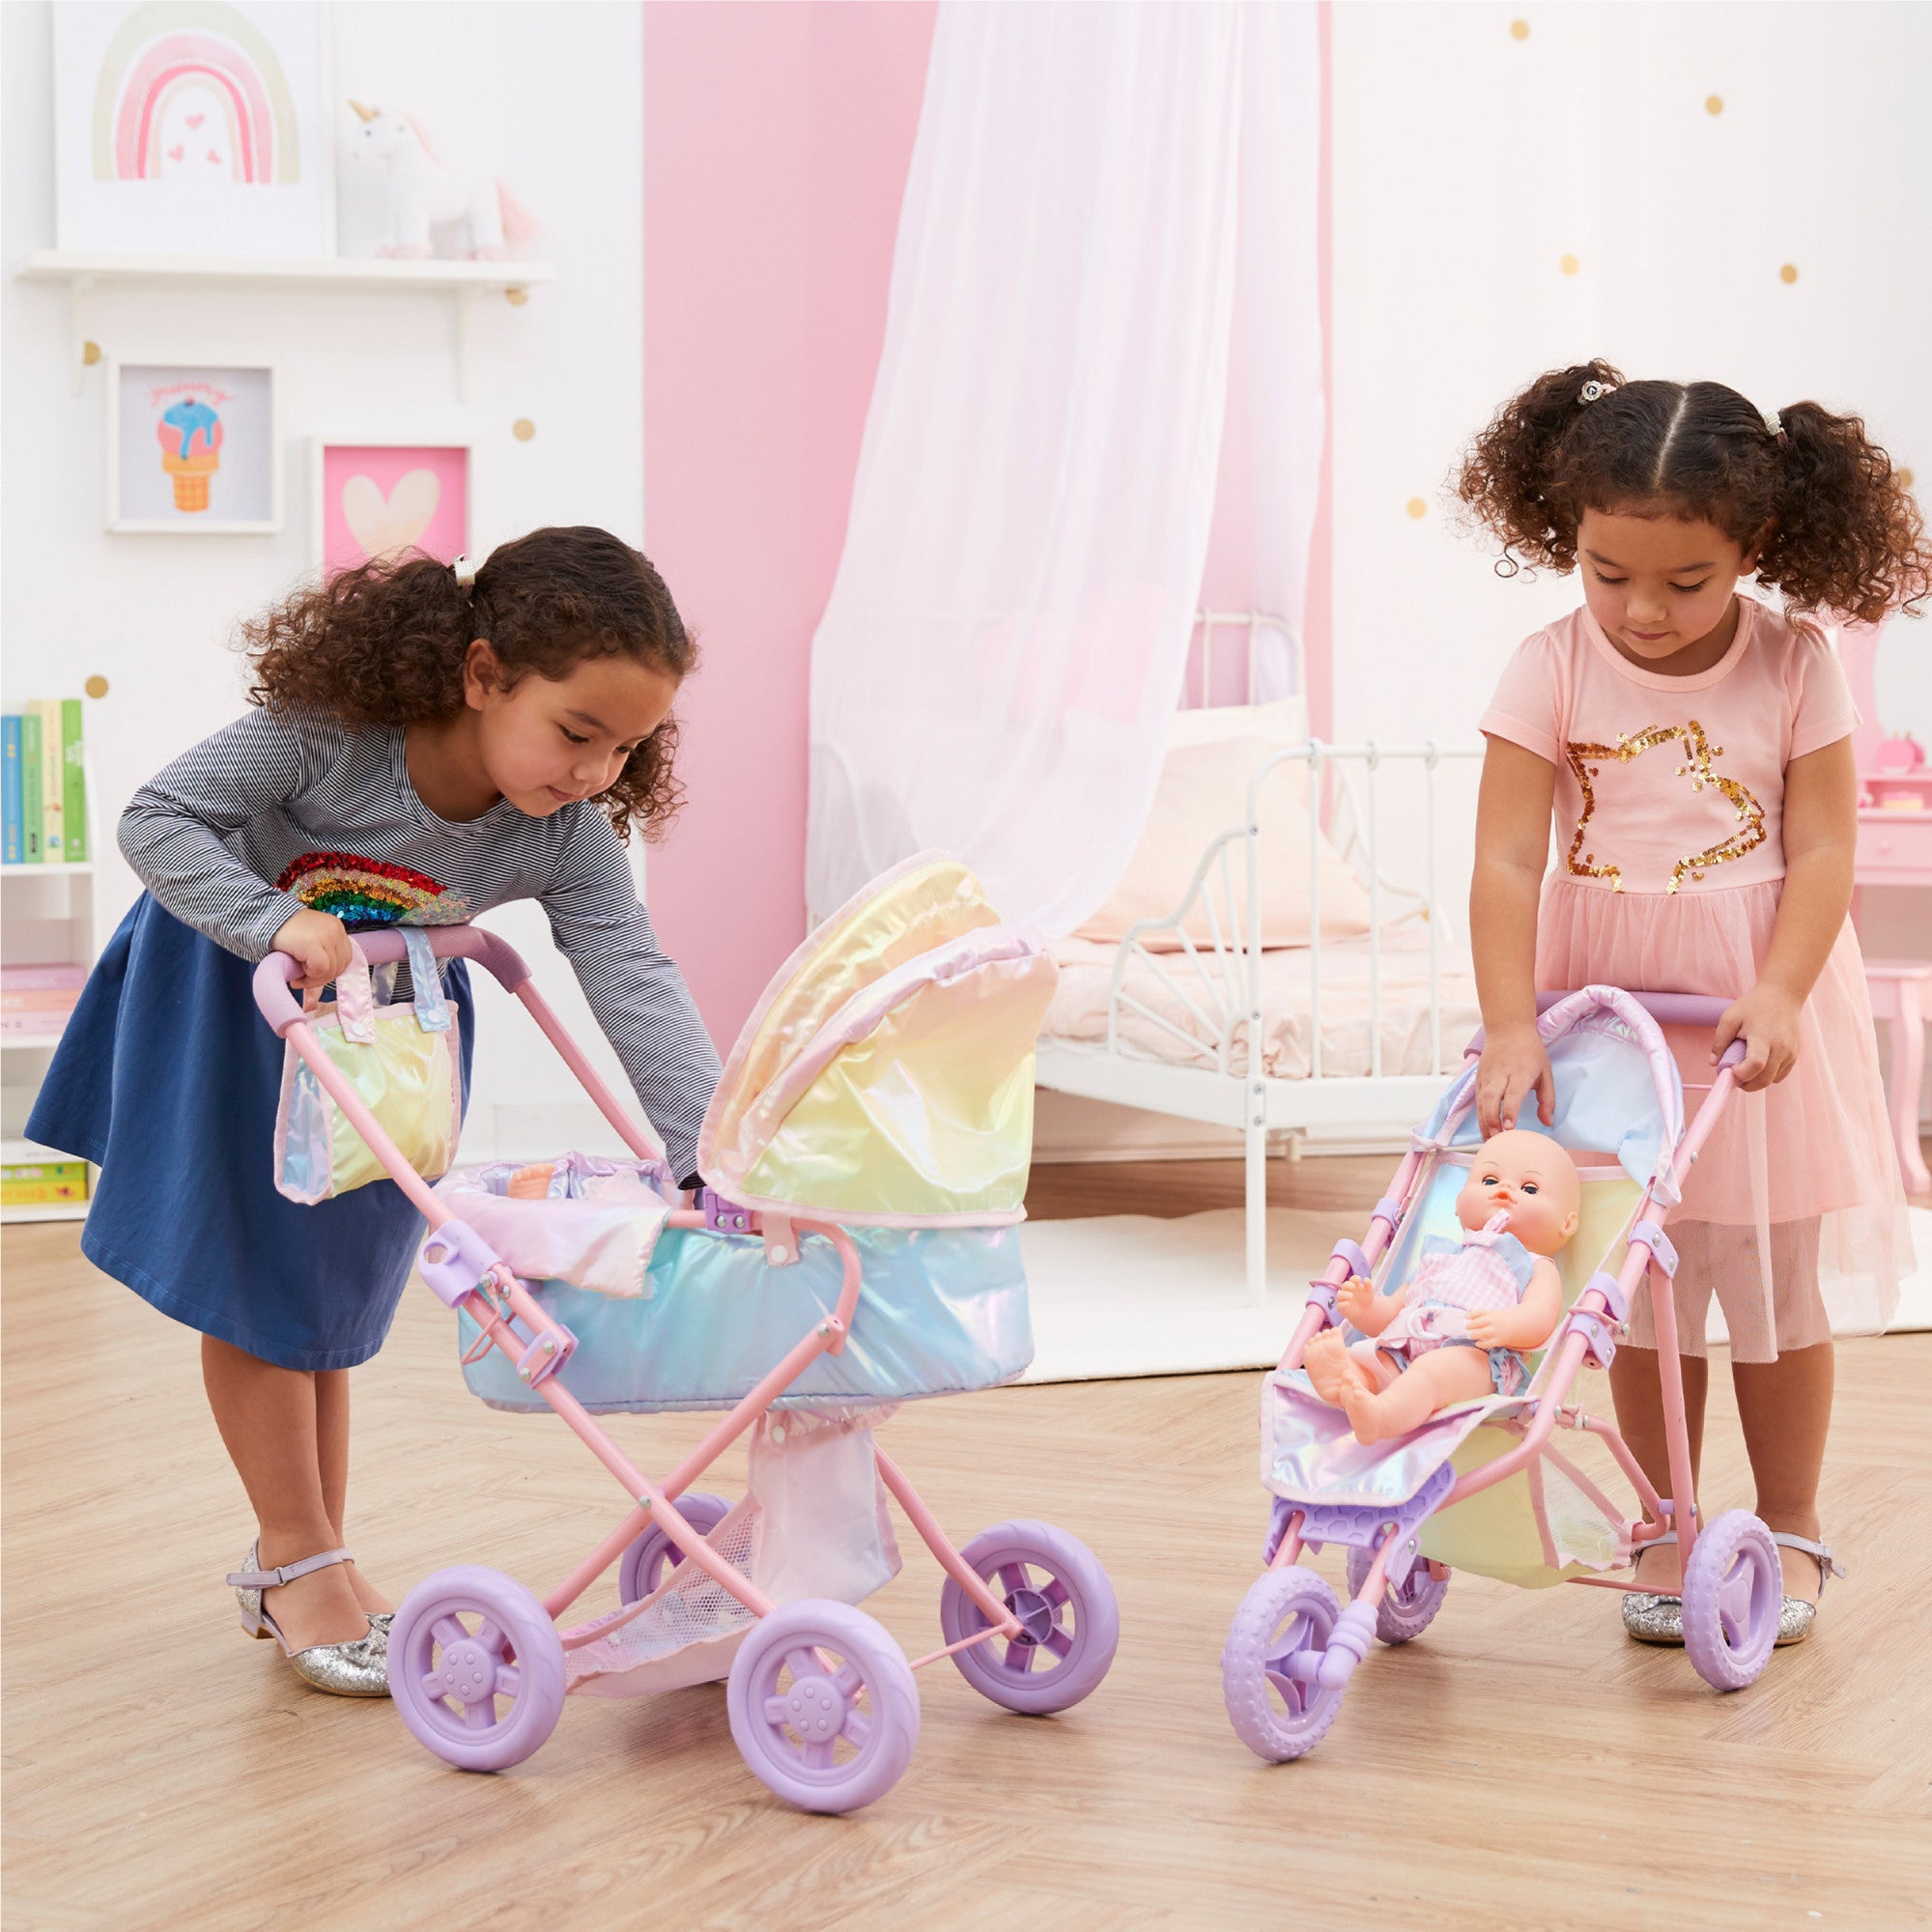 Olivia’s Little World Magical Dreamland Deluxe Baby Doll Stroller and Carrier, Iridescent